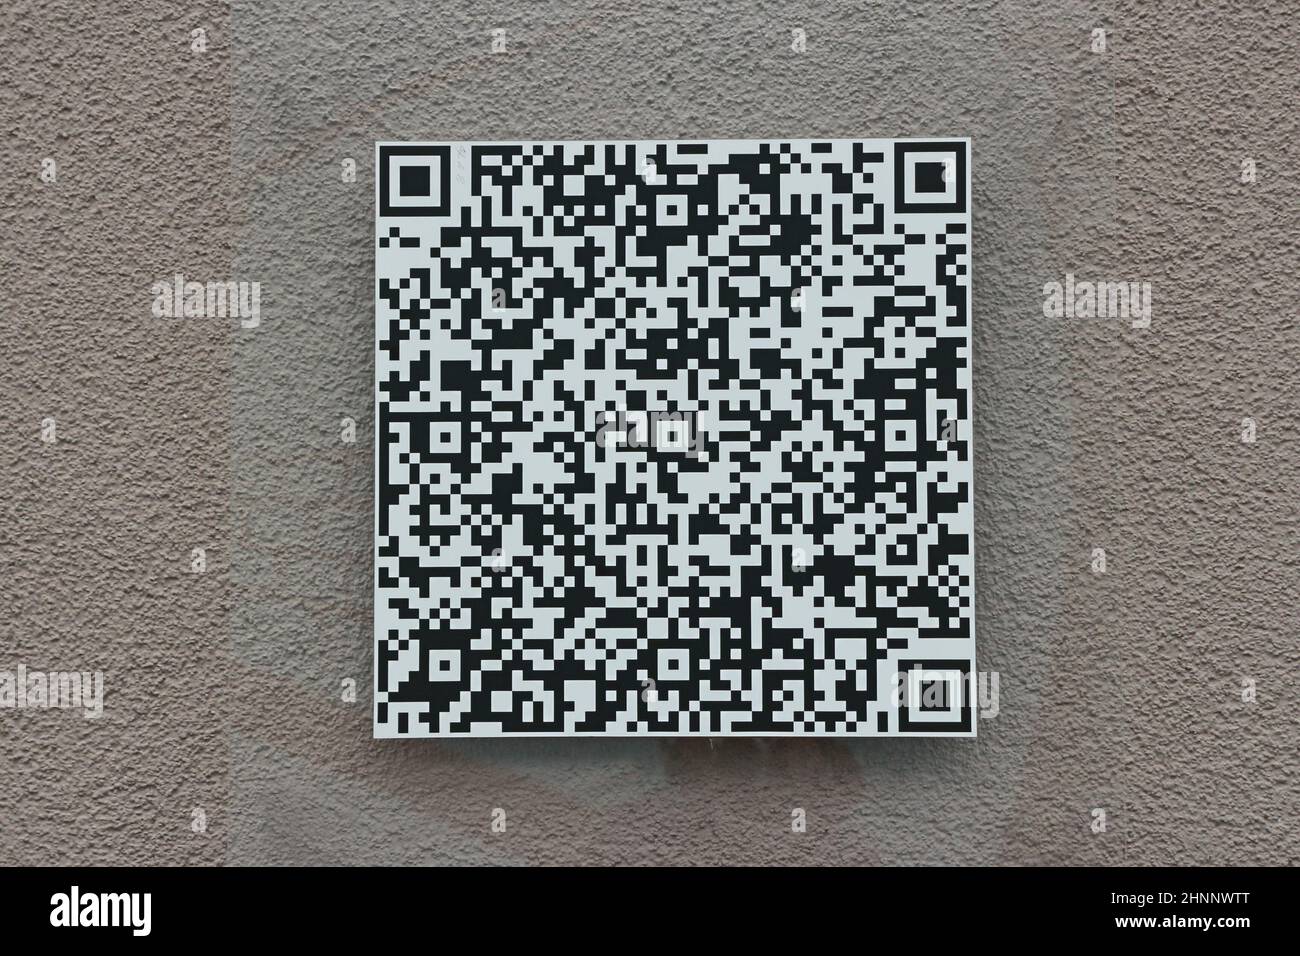 QR code two-dimensional barcode Stock Photo